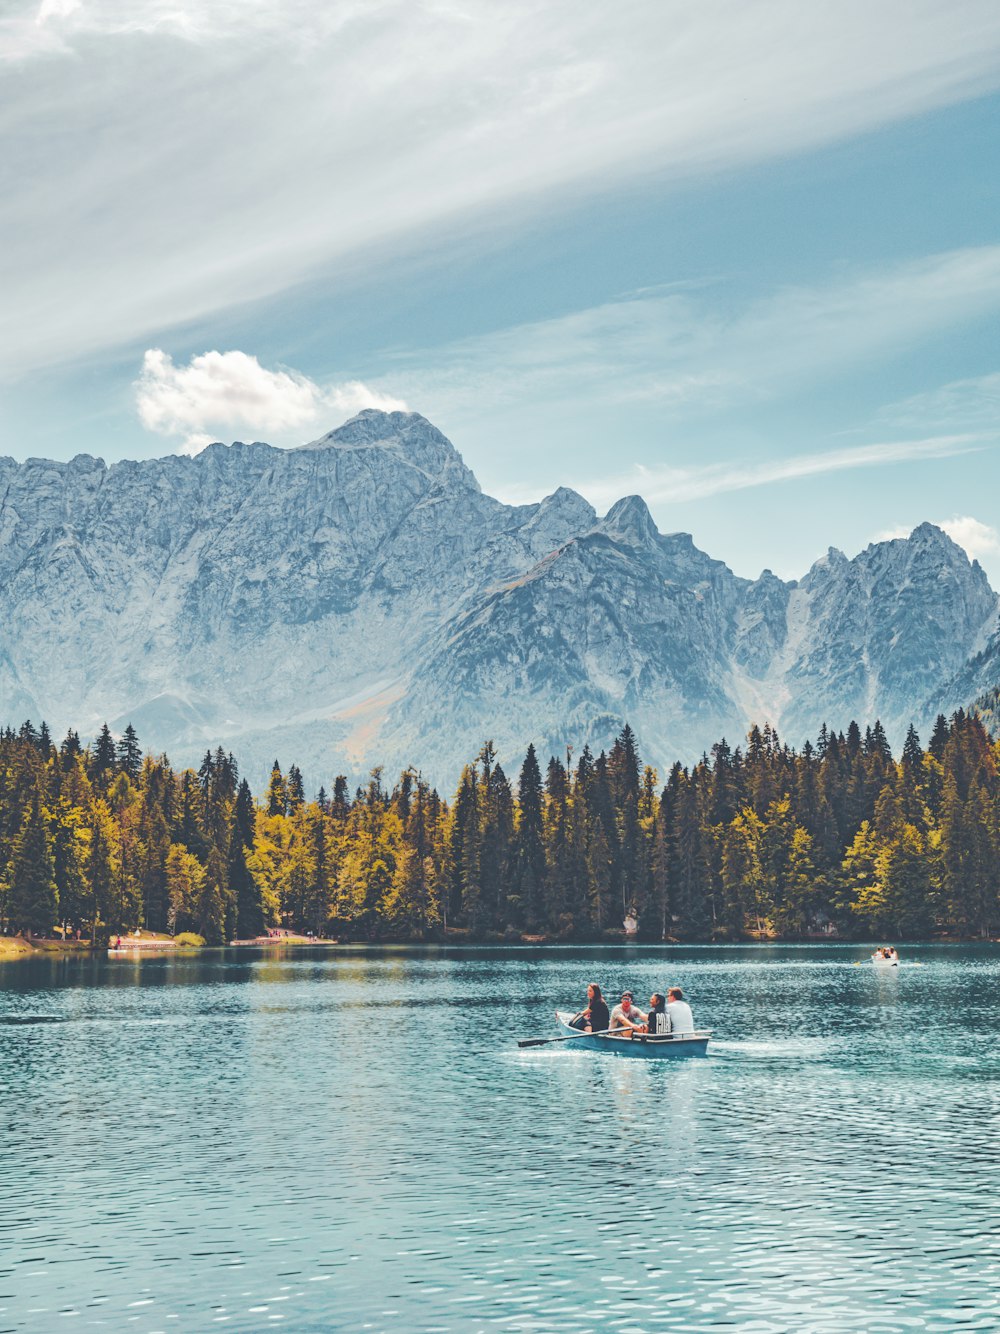 a group of people in a boat in a lake with mountains in the background